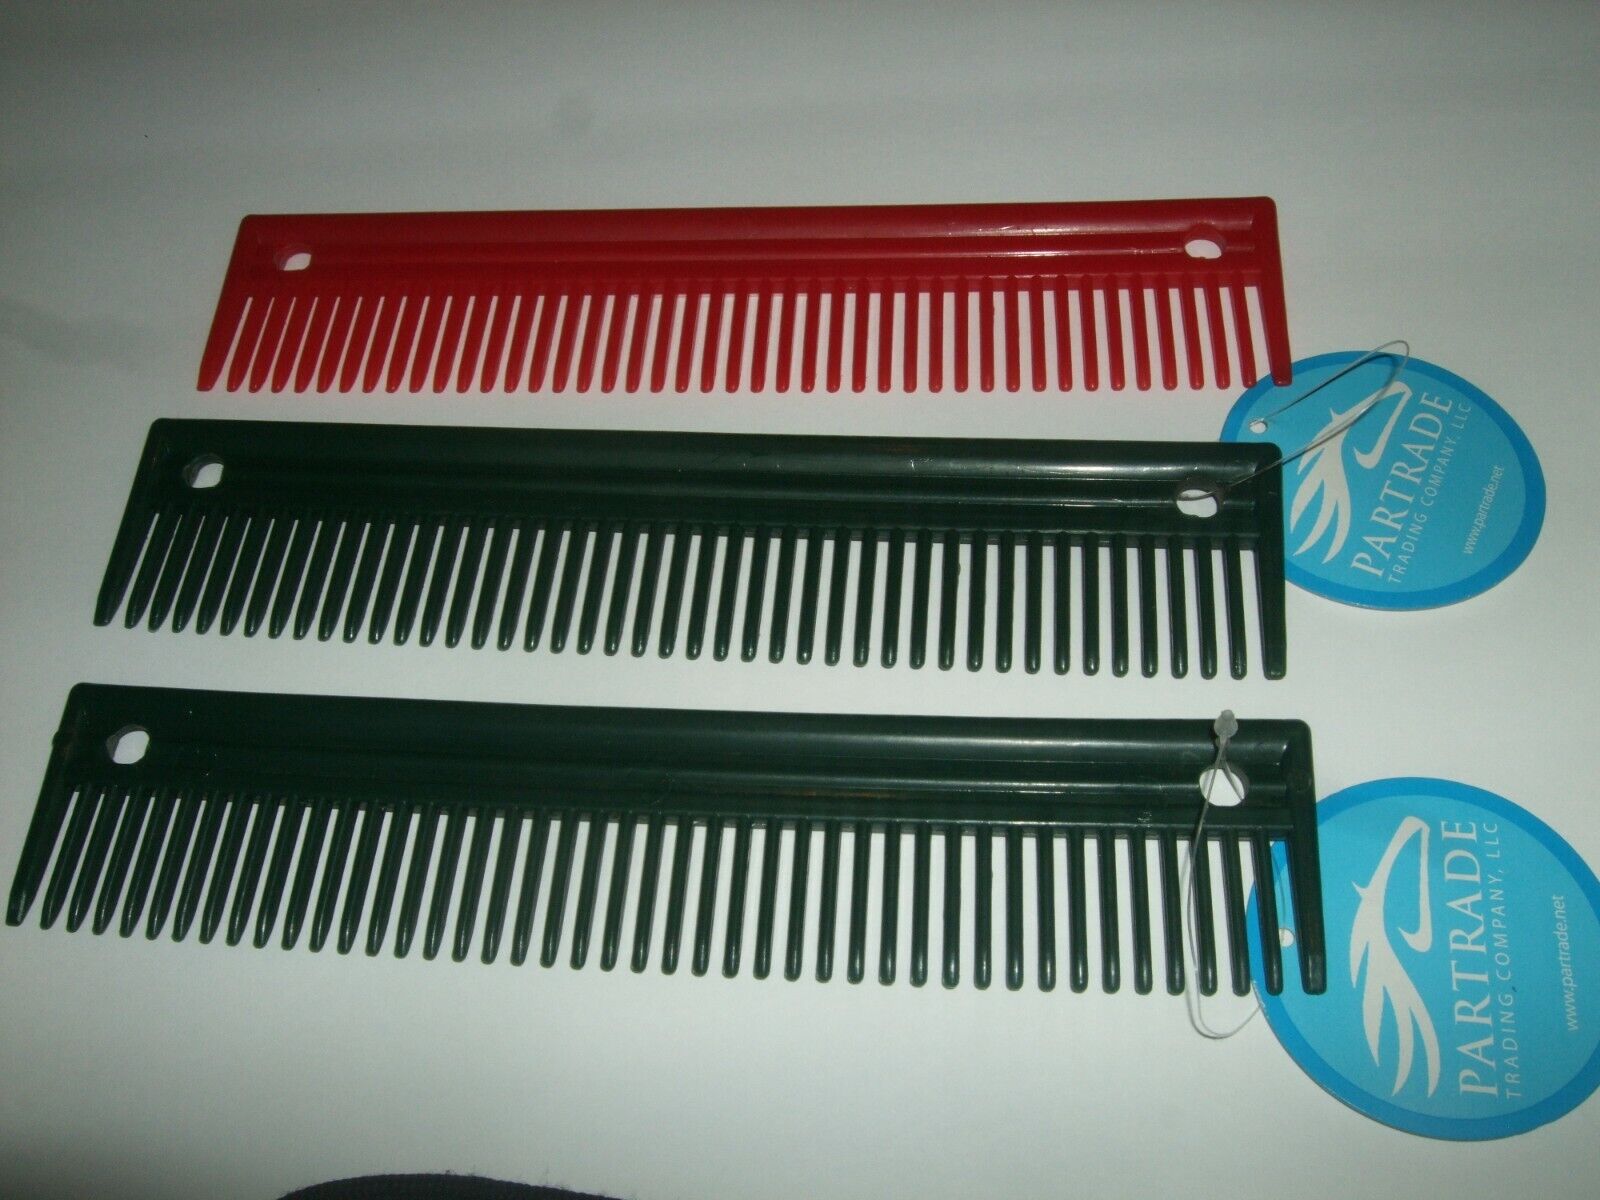 Partrade Plastic Grooming Comb You Choose Color Approx. Size 8 3/4" X 1 3/4"